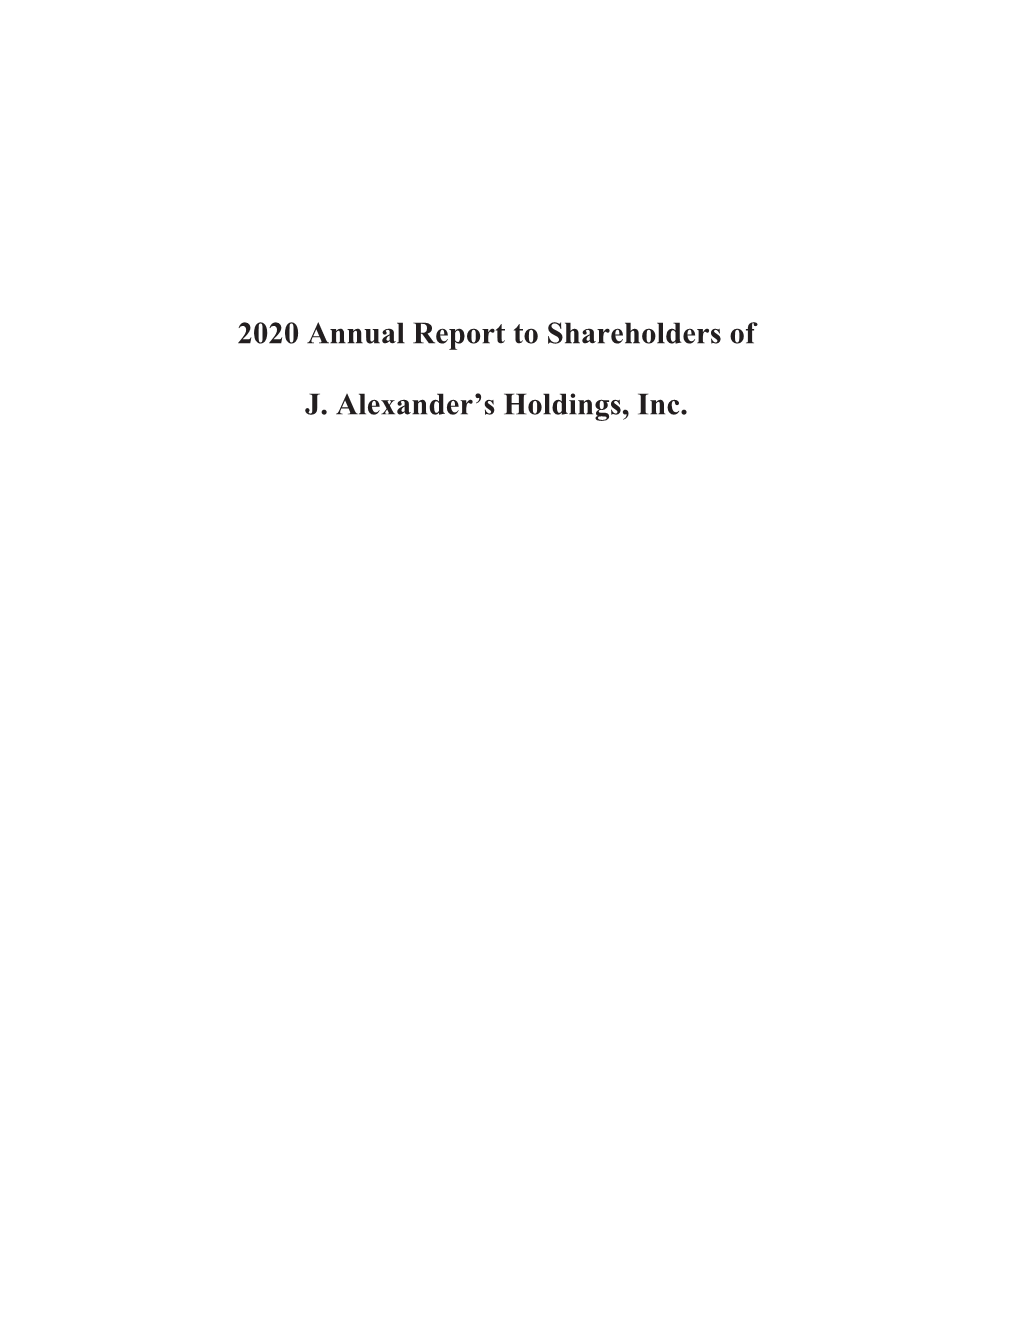 2020 Annual Report to Shareholders of J. Alexander's Holdings, Inc